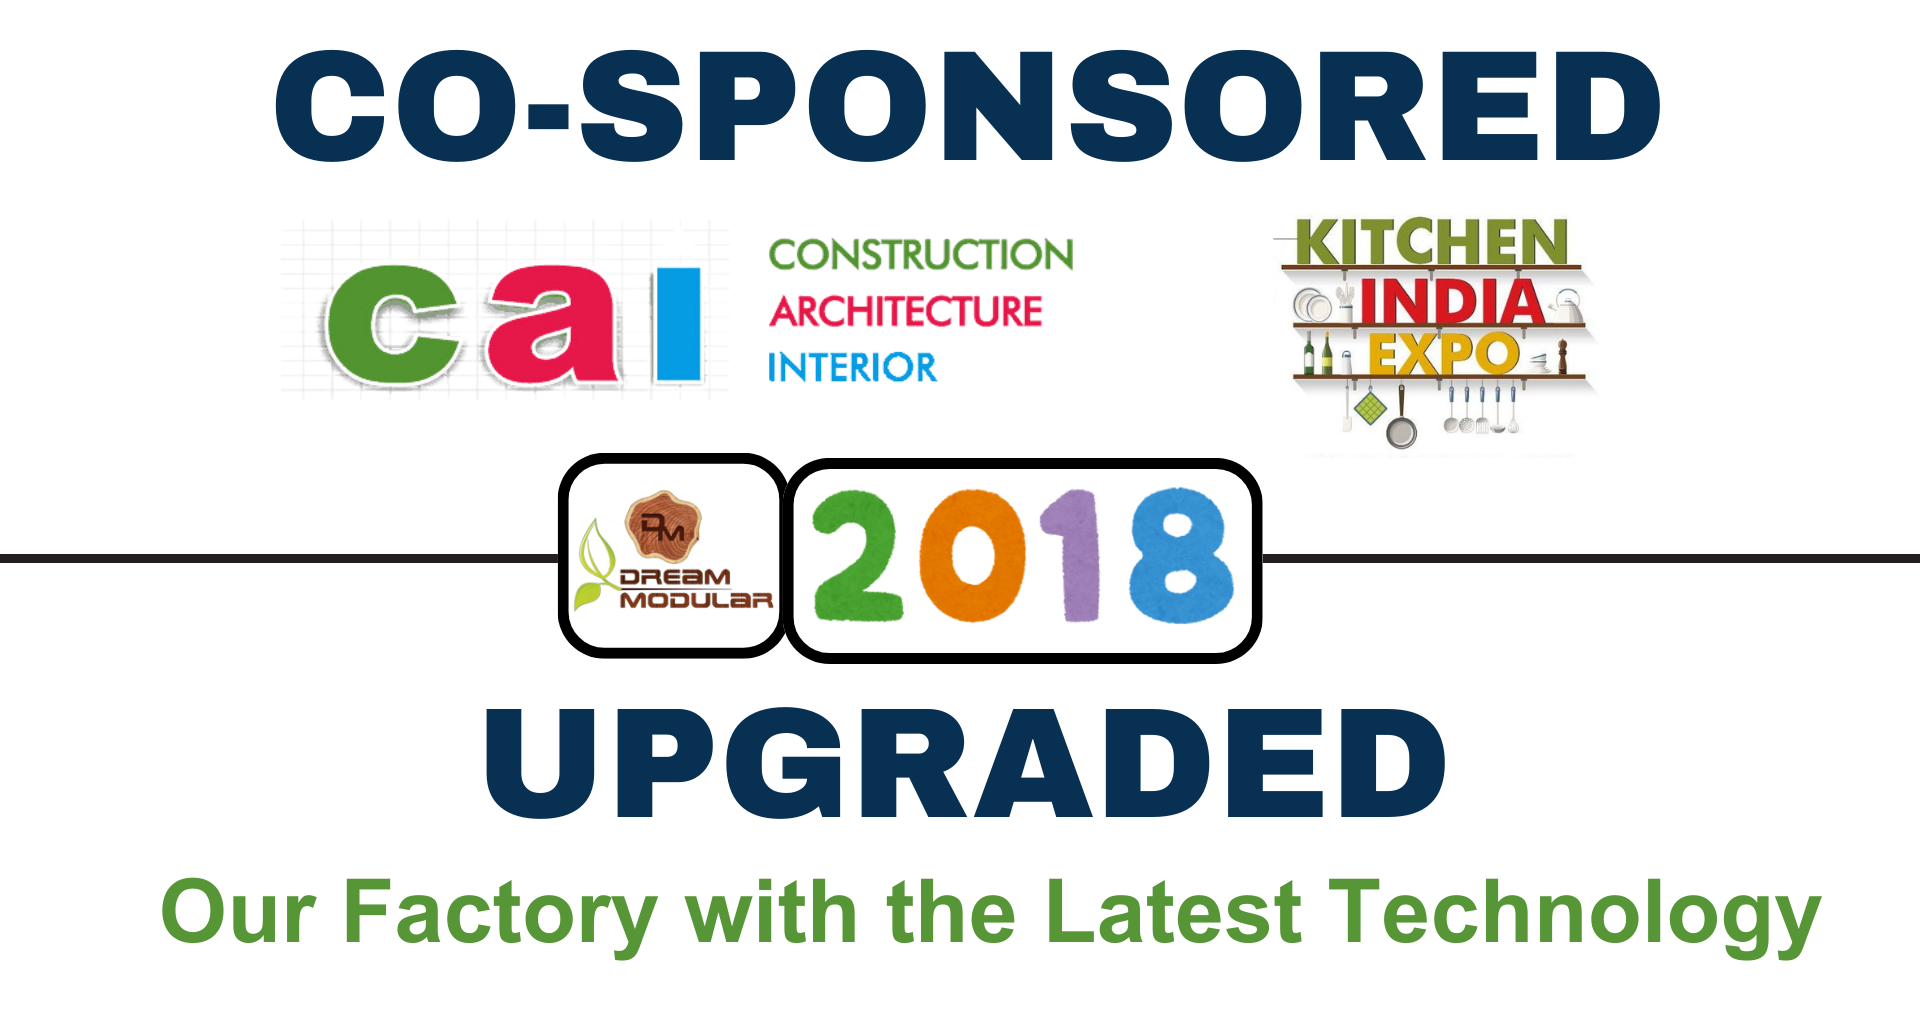 Co-sponsored The CAI Expo and Kitchen India Expo in Hyderabad. Upgraded our factory with latest technology in aim to serve our customers better. - 2018